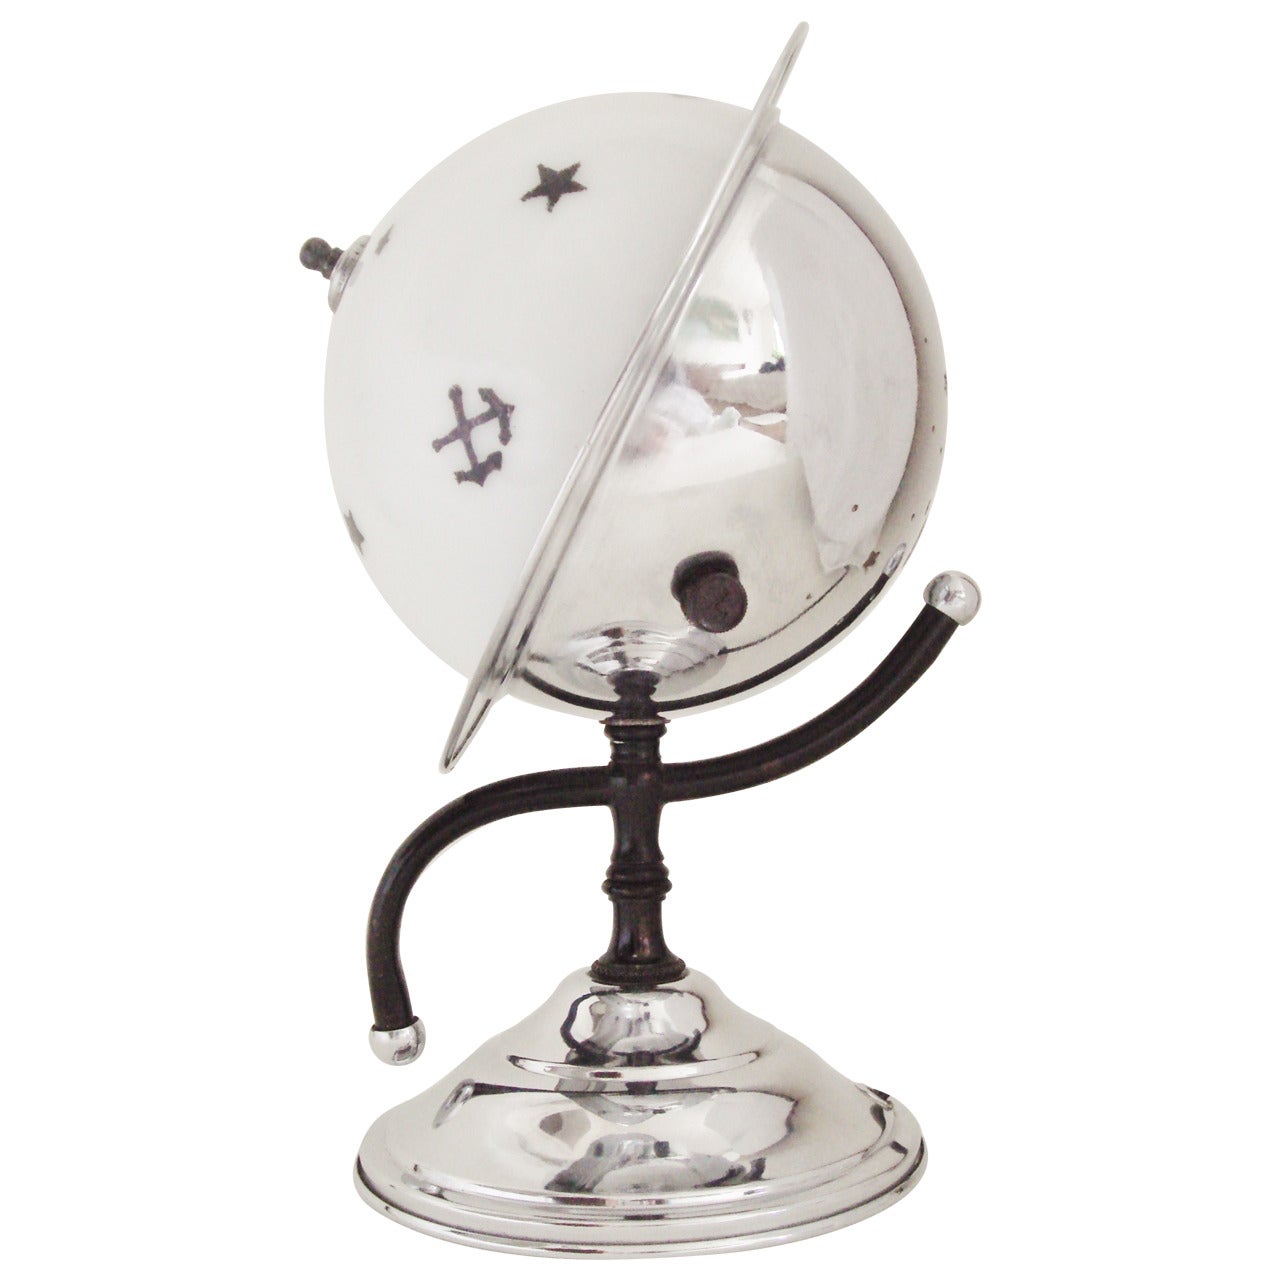 American Art Deco Chrome, Enamel and Painted Milk Glass Planet Lamp